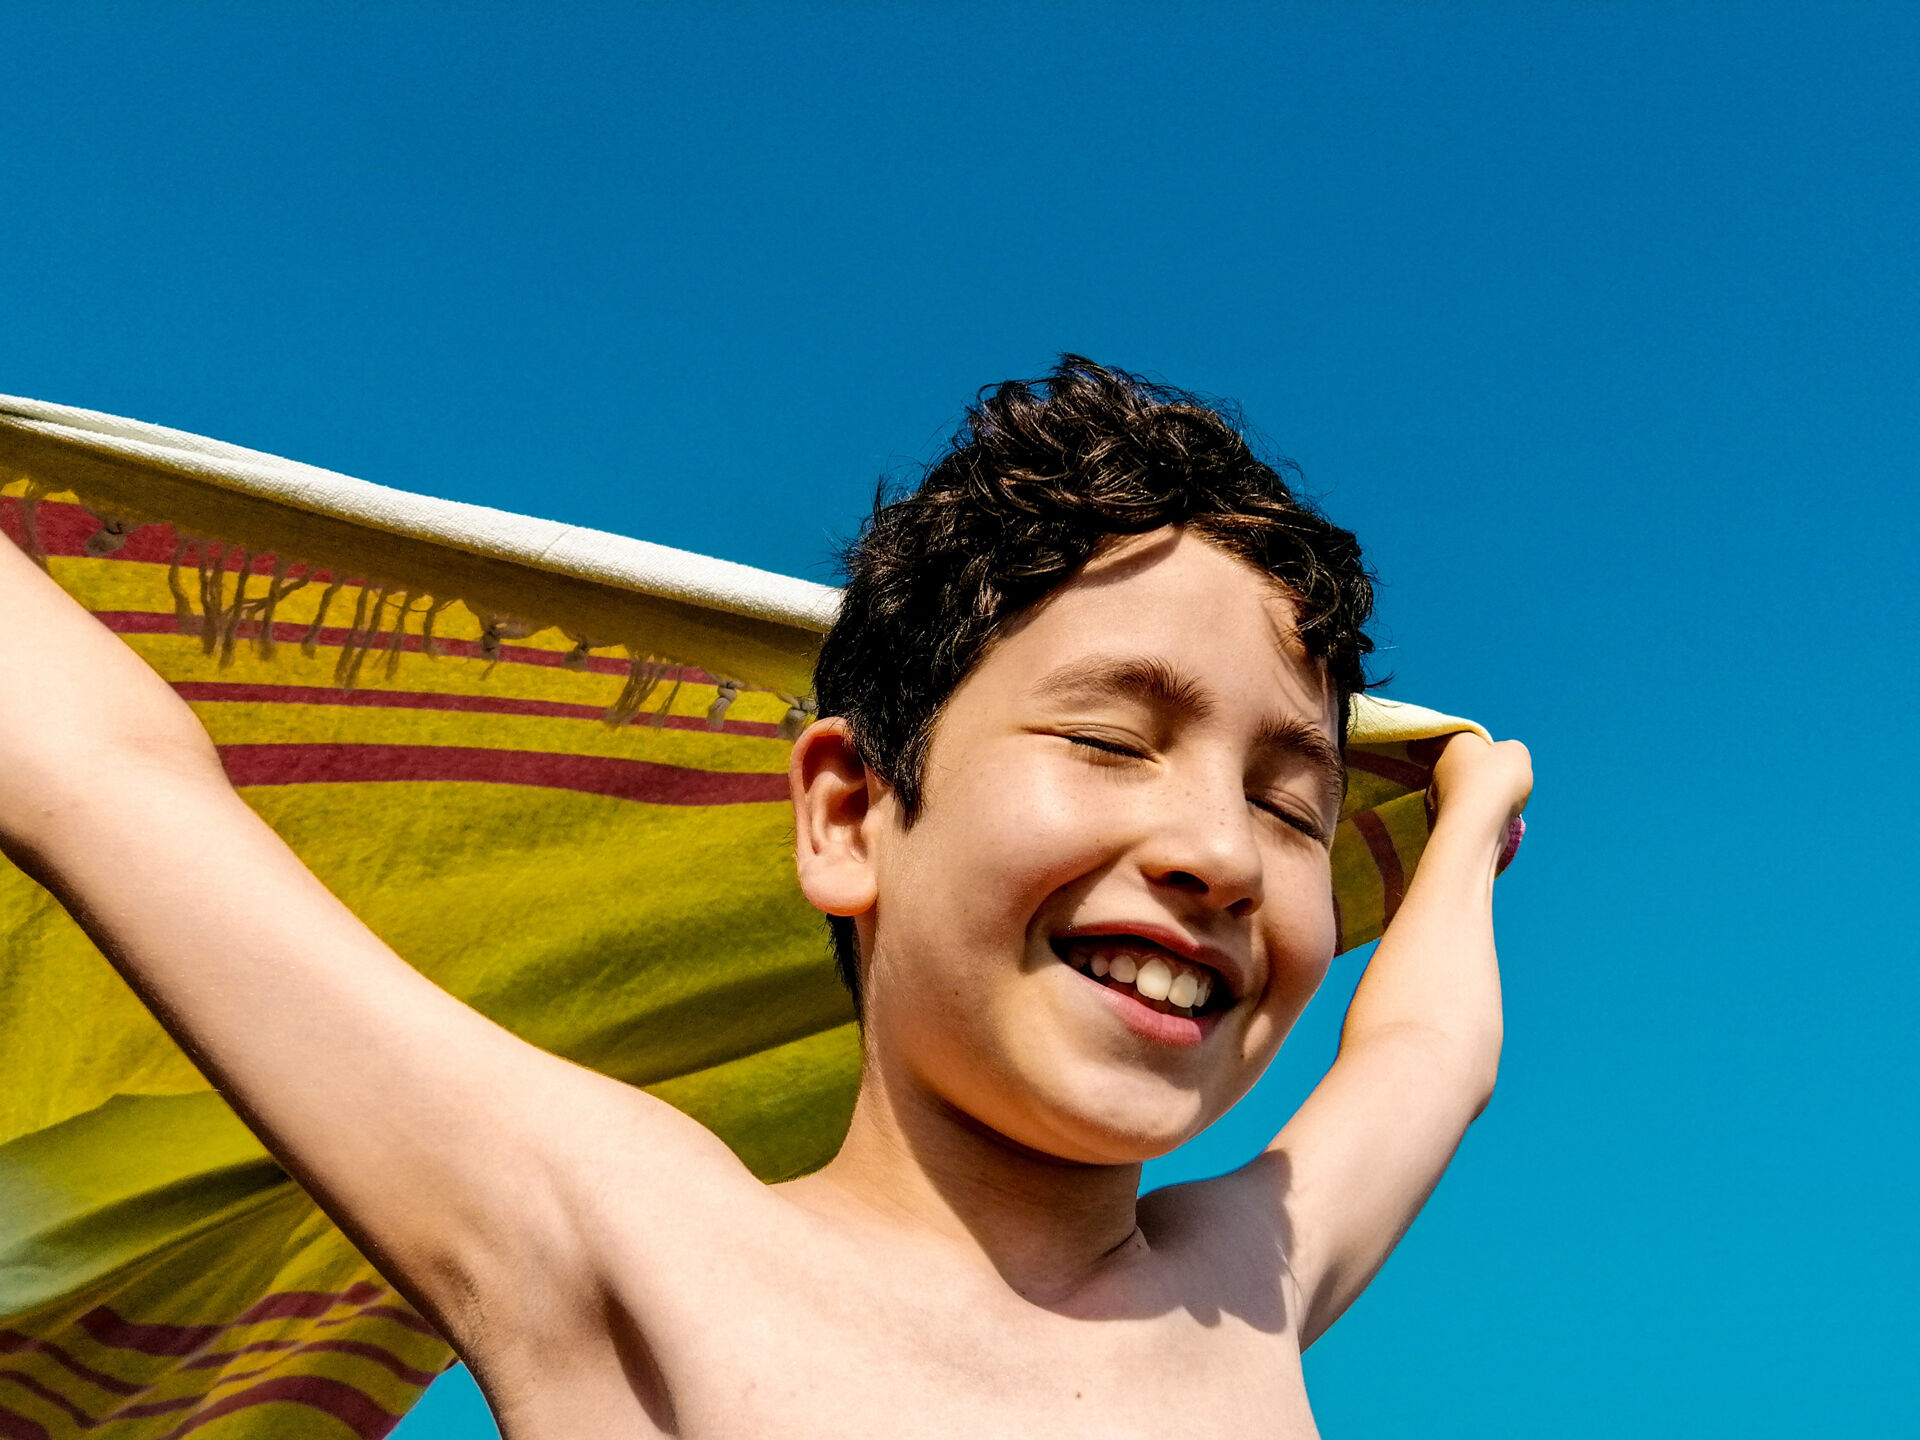 Boy with Yellow Towel